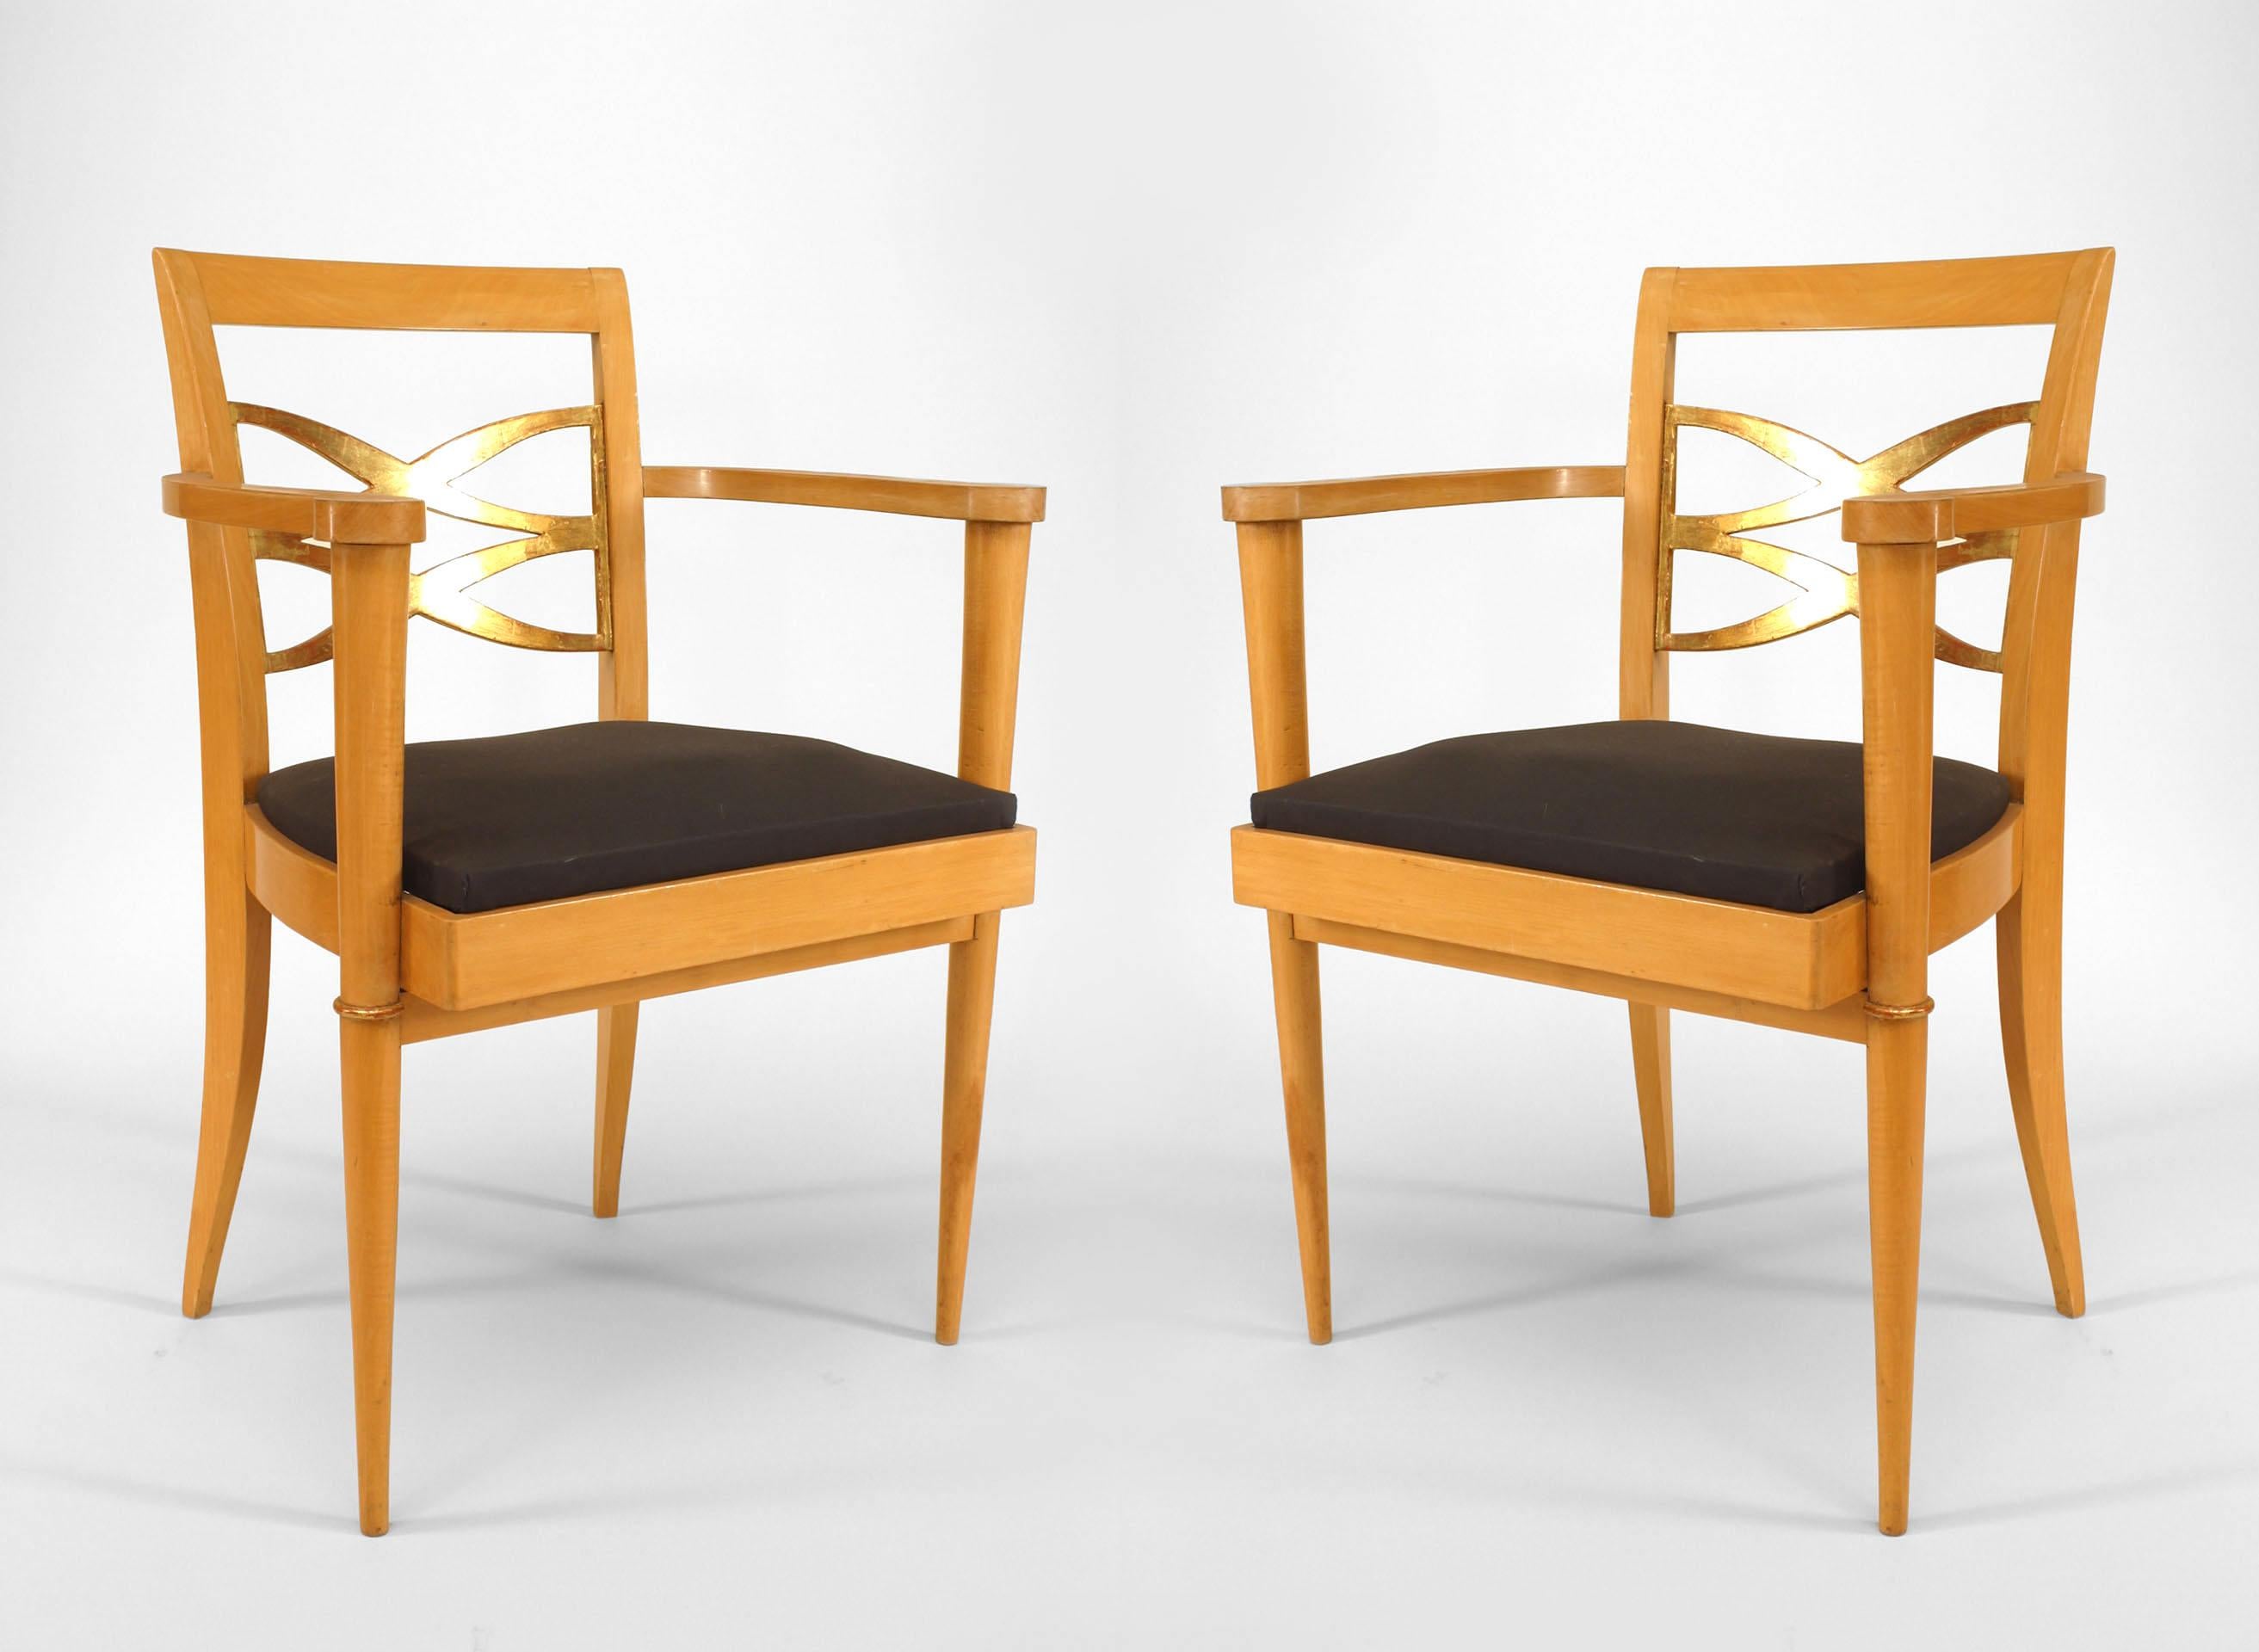 Pair of French 1940s sycamore arm chairs with open design gilded back & trim and slip seat attributed to BATISTIN SPADE. Two pairs - PRICED PER PAIR.


Batistin Spade (13 March 1891- November 16, 1969) was a interior architect and furniture